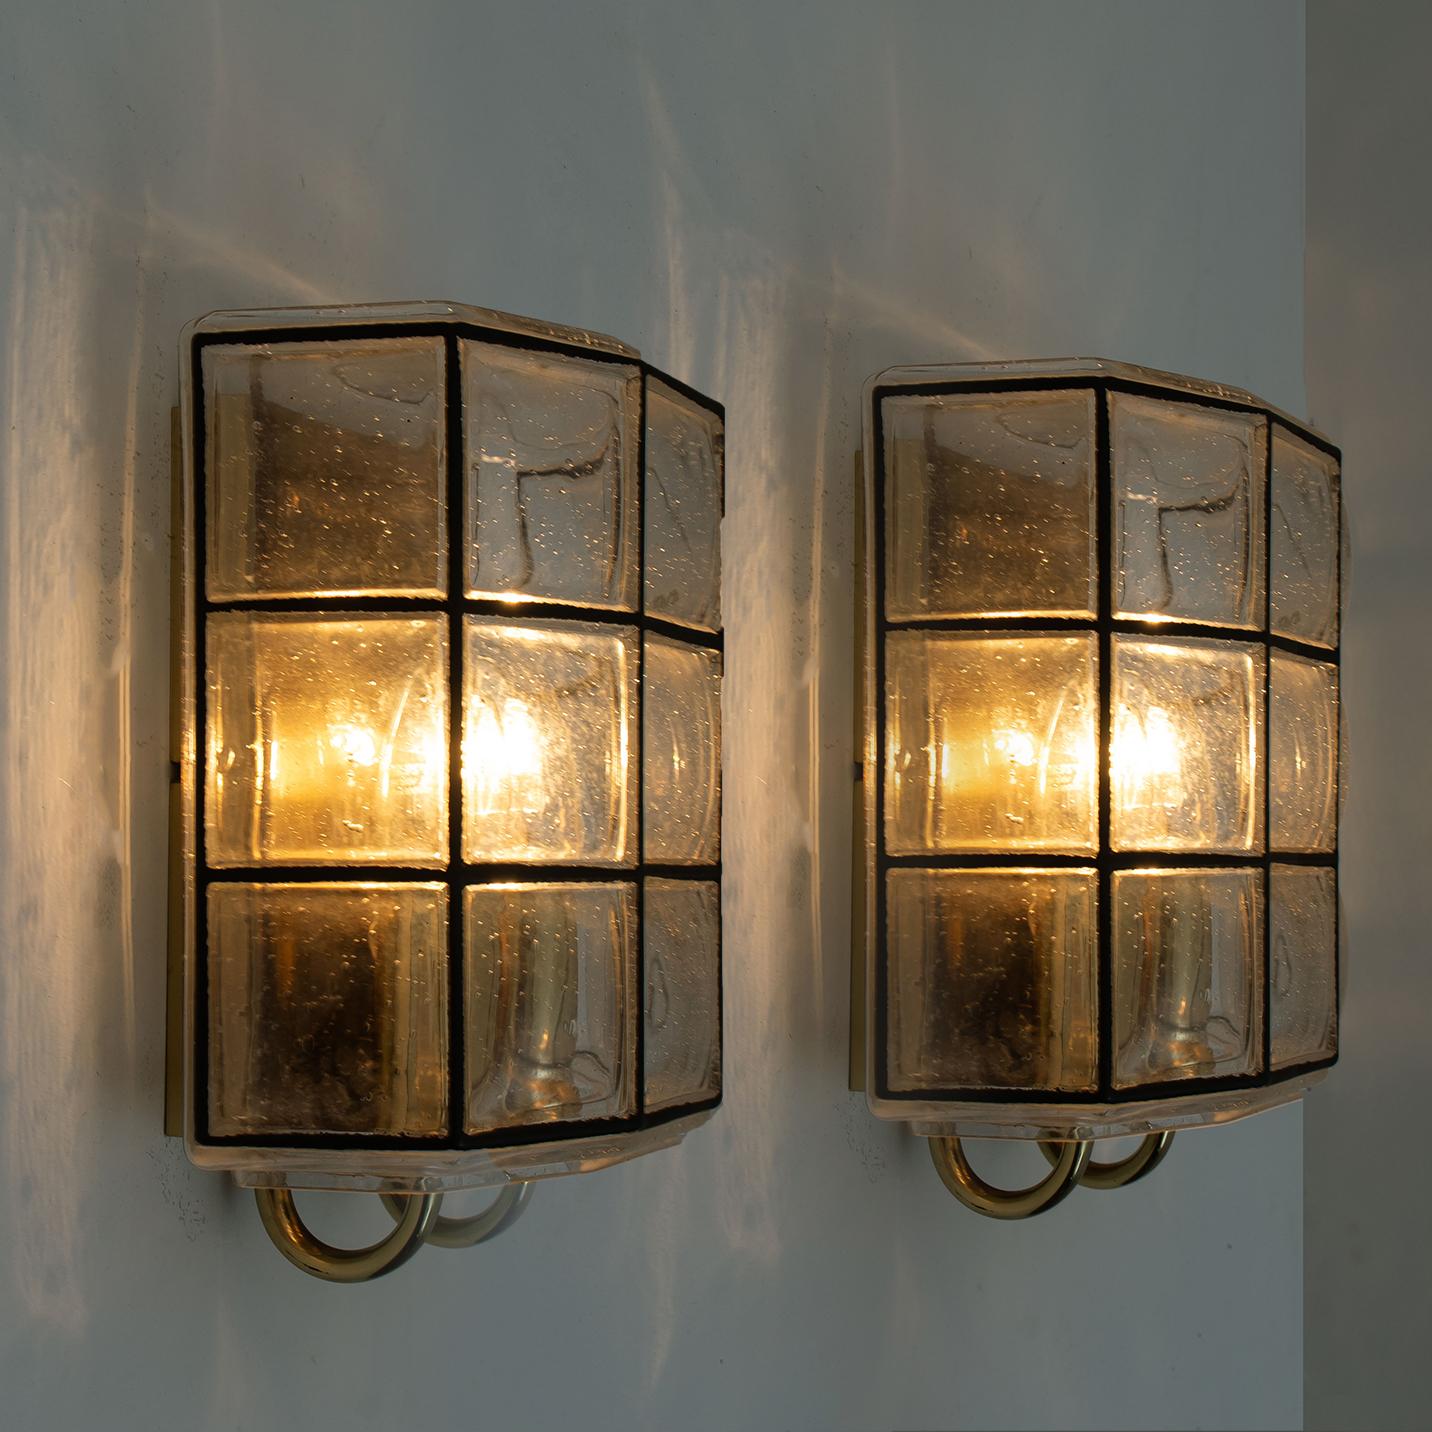 This beautiful and unique pair of hand blown glass wall lights were manufactured by Glashütte Limburg in Germany during the 1960s, (late 1960s or early 1970s). 

Beautiful craftsmanship. These midcentury vintage lights feature handmade, elaborate